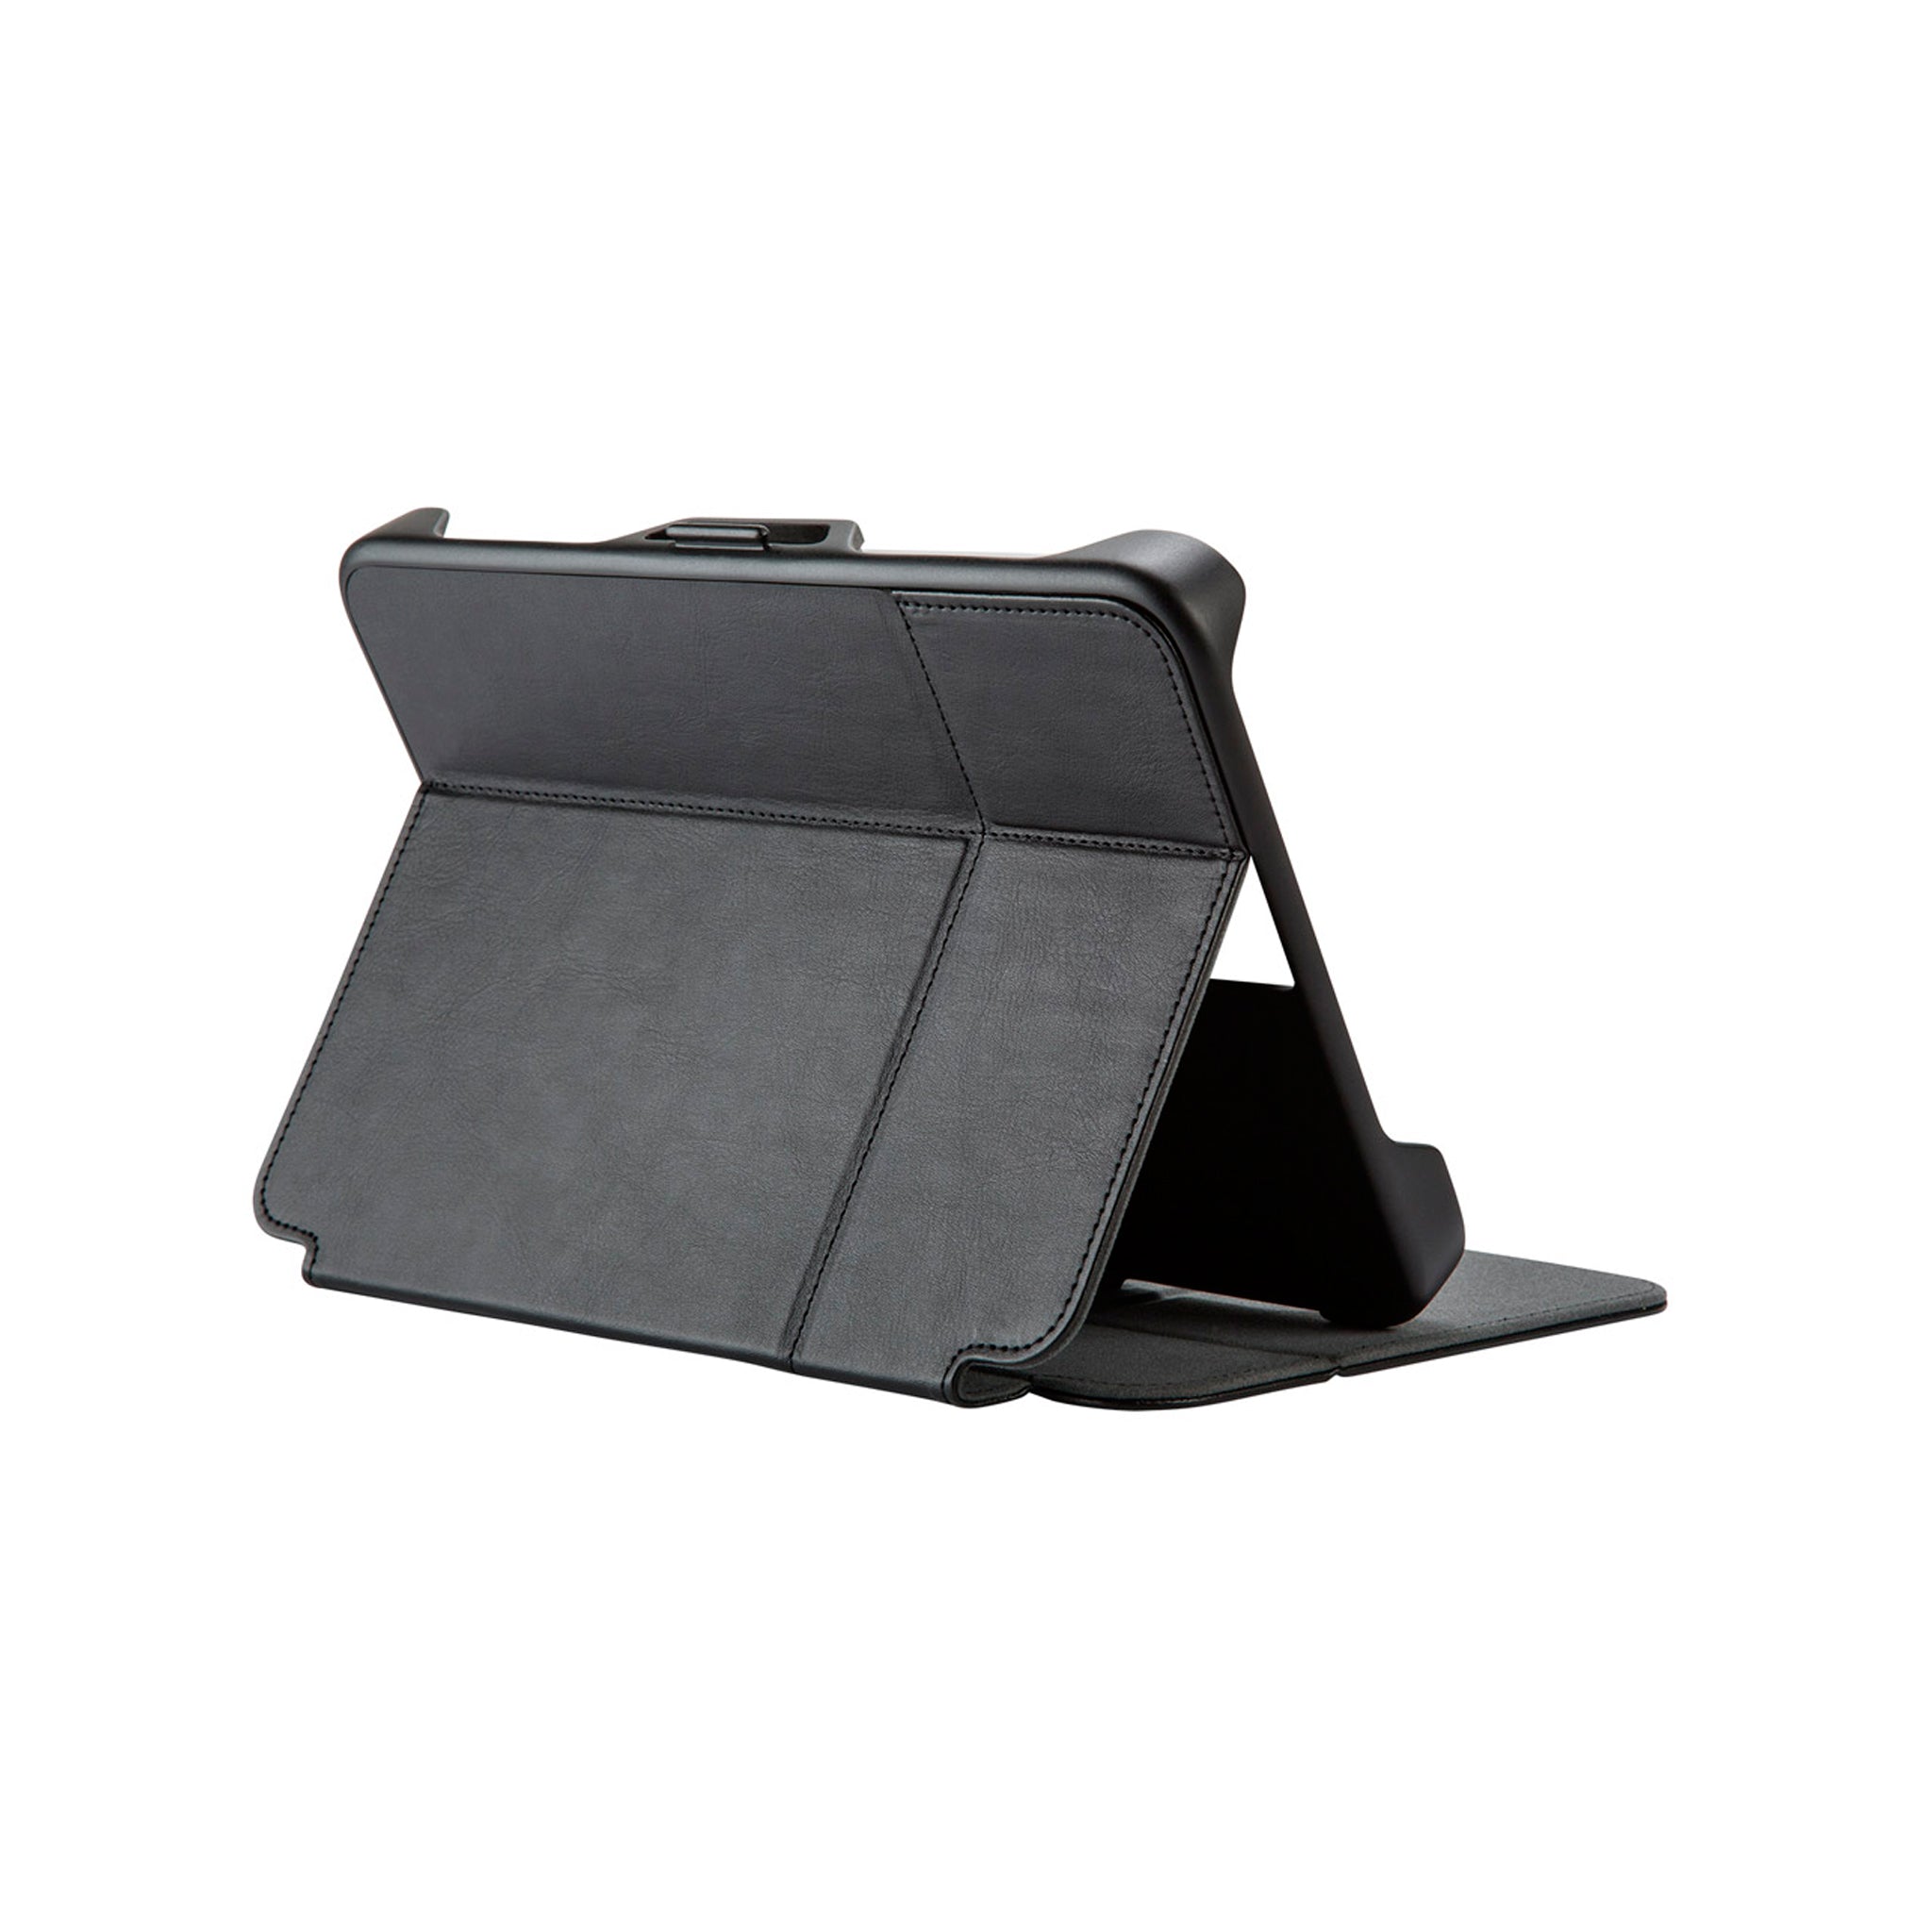 Speck - Stylefolio Flex Case Fits Most 7 To 8.5 Inch Tablets - Black And Slate Gray